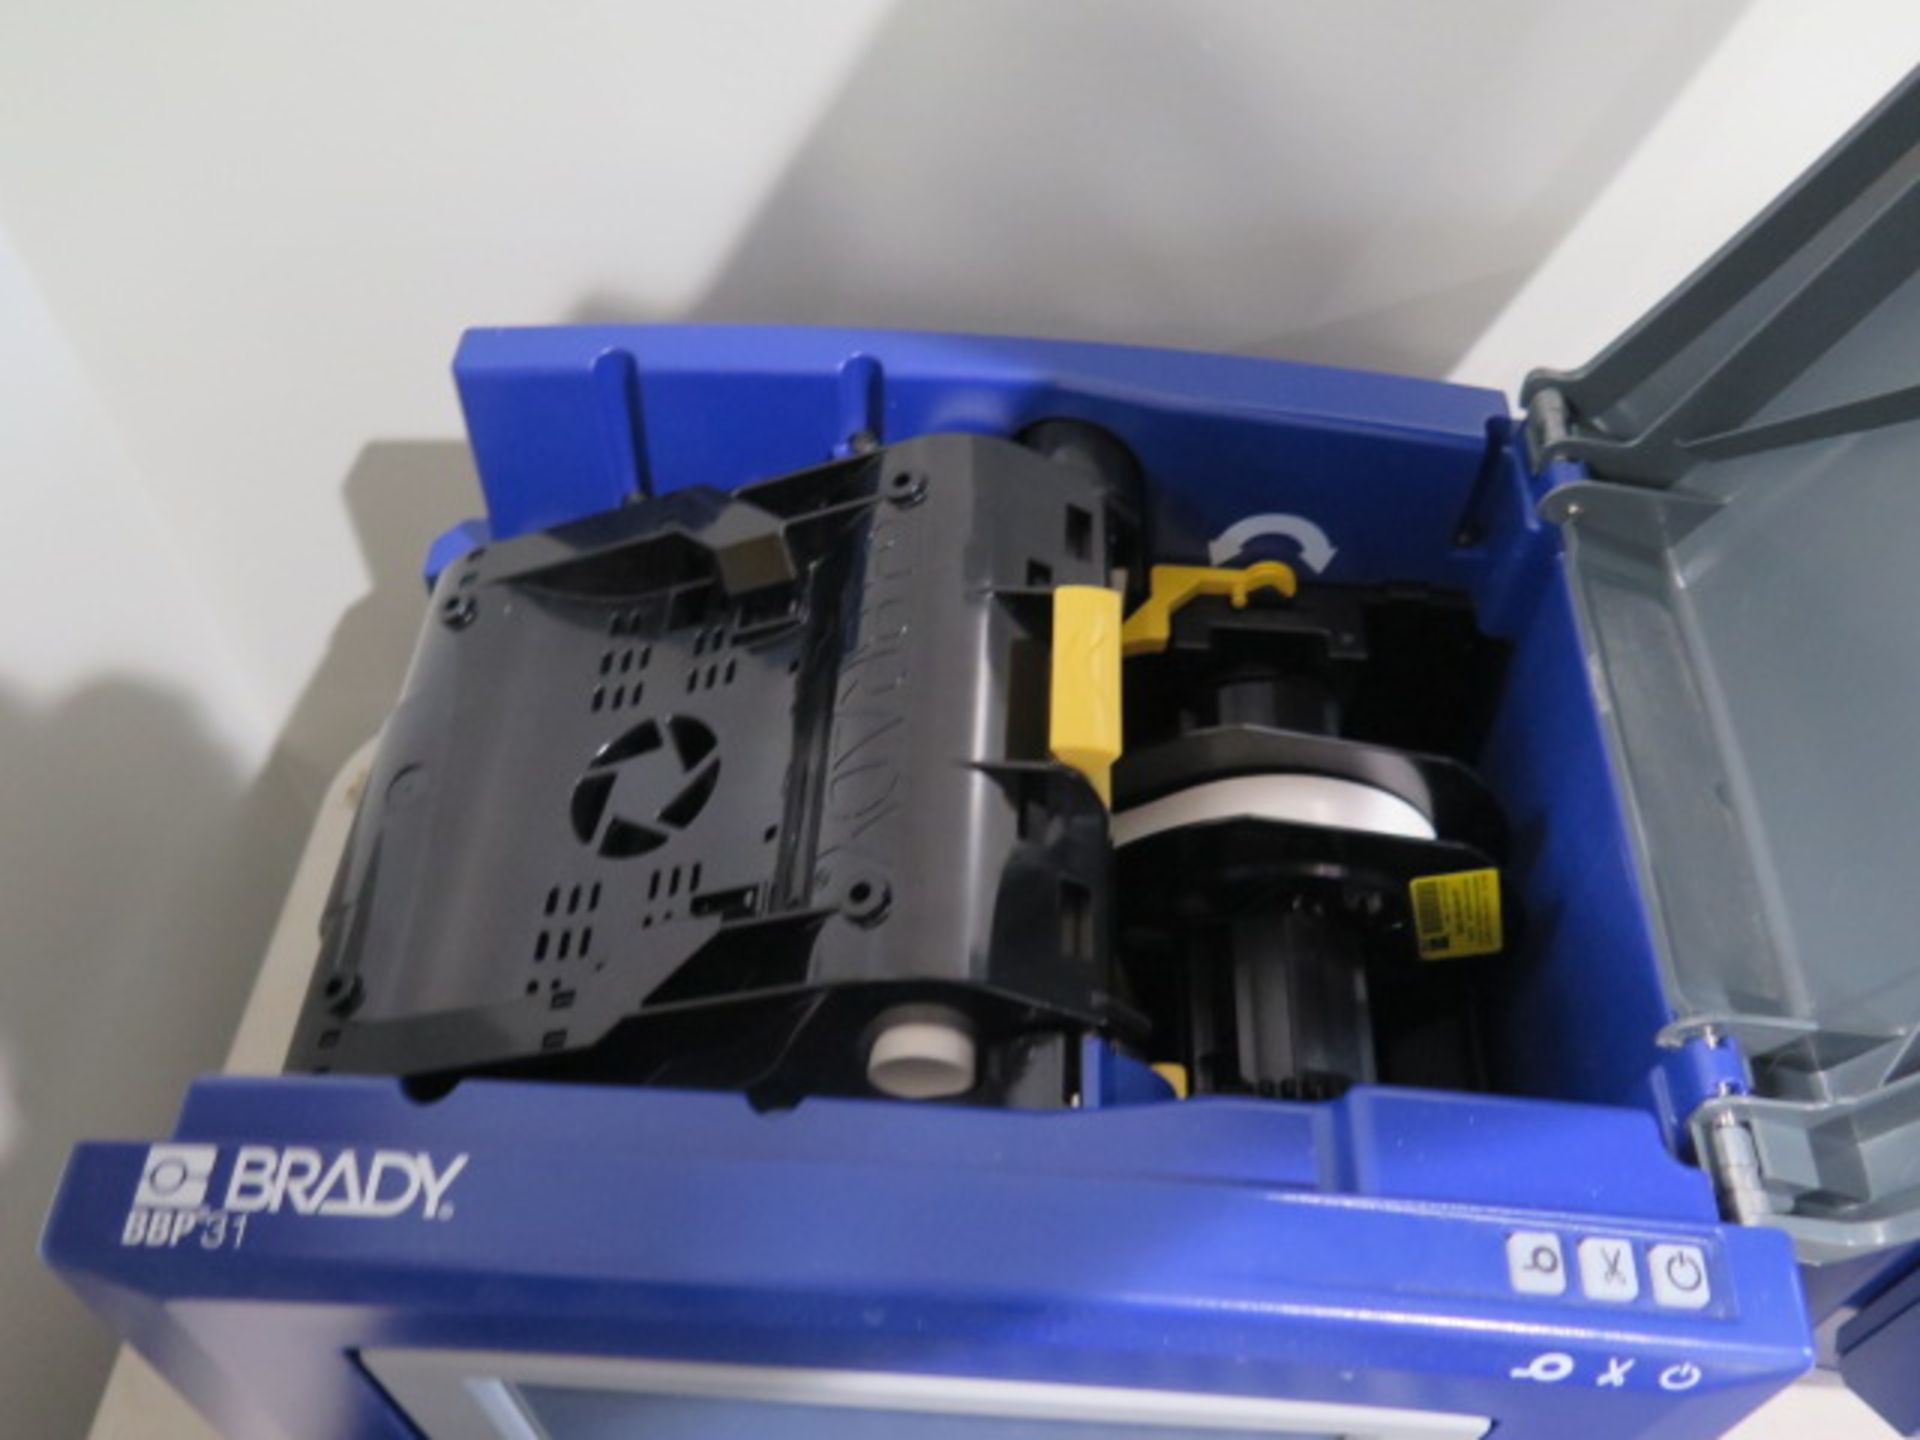 Brady BBP-31 Lable Printer (SOLD AS-IS - NO WARRANTY) - Image 3 of 5